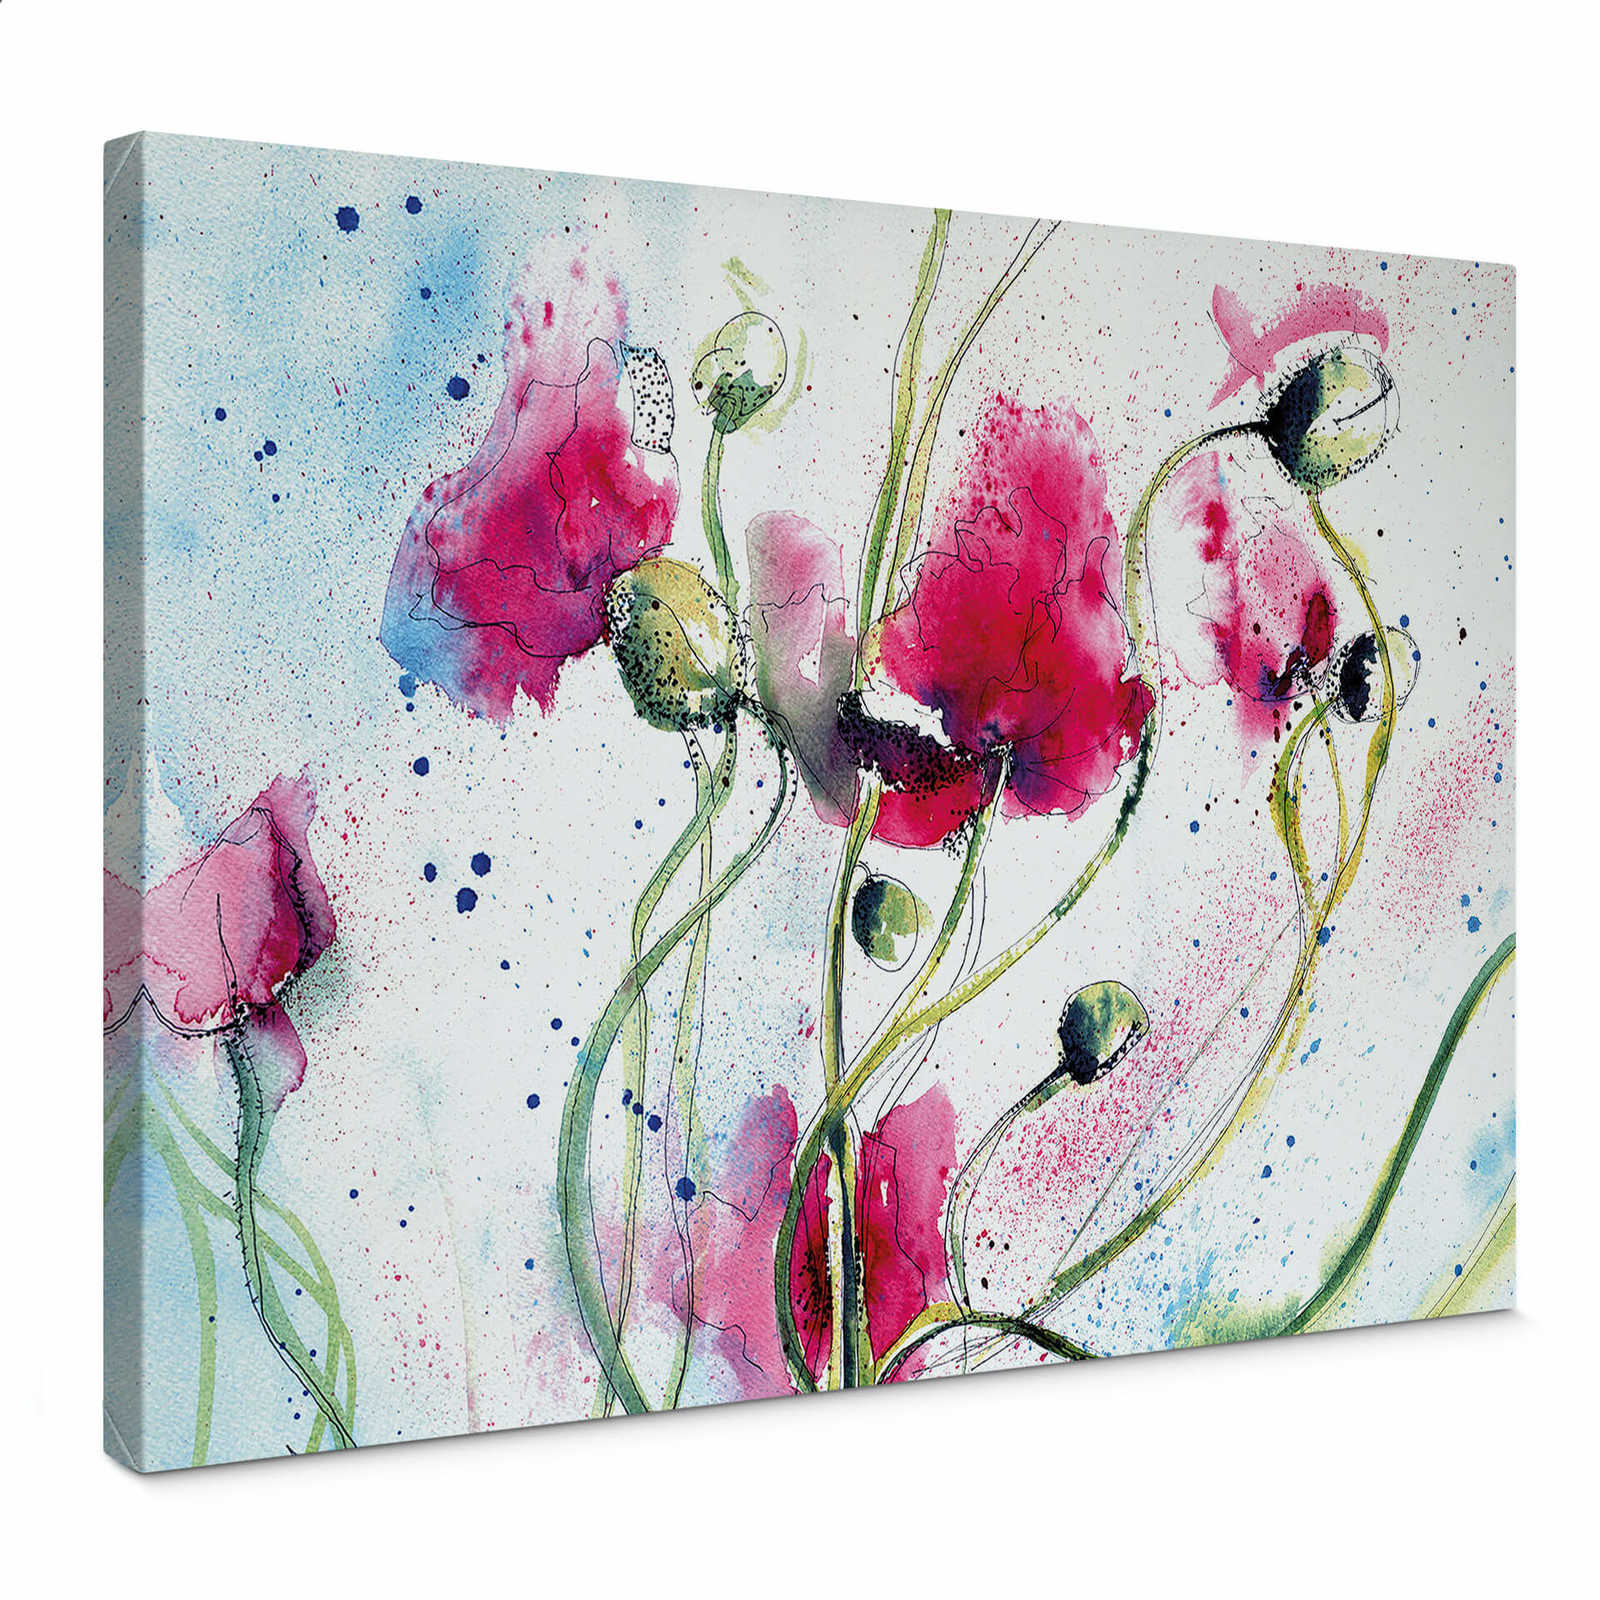         Canvas print poppies, bright watercolour painting
    